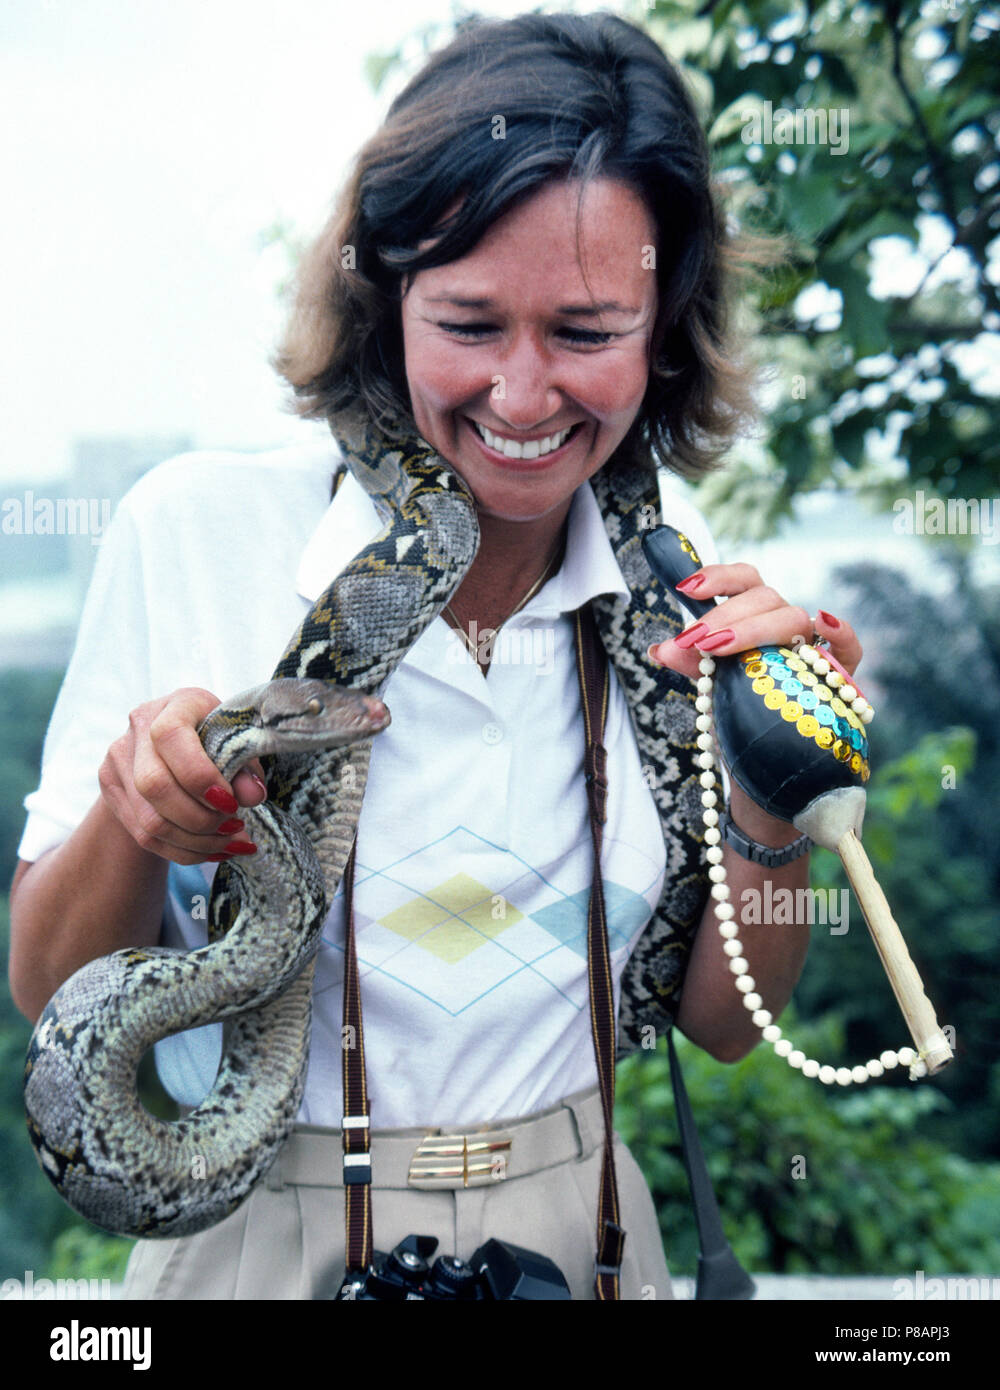 A female tourist allows a Burmese python snake to be draped around her neck while she poses for a souvenir photograph in Singapore. The reptile is the tame pet of a local snake charmer who makes his living entertaining visitors to that island nation in Southeast Asia. Although this large snake has been trained not to be aggressive, the constrictor can wrap its long body around prey and squeeze it to death. Other snake charmers feature venomous snakes such as cobras and other vipers but the fangs or glands that produce their poisonous venom have been removed from those reptiles. Stock Photo